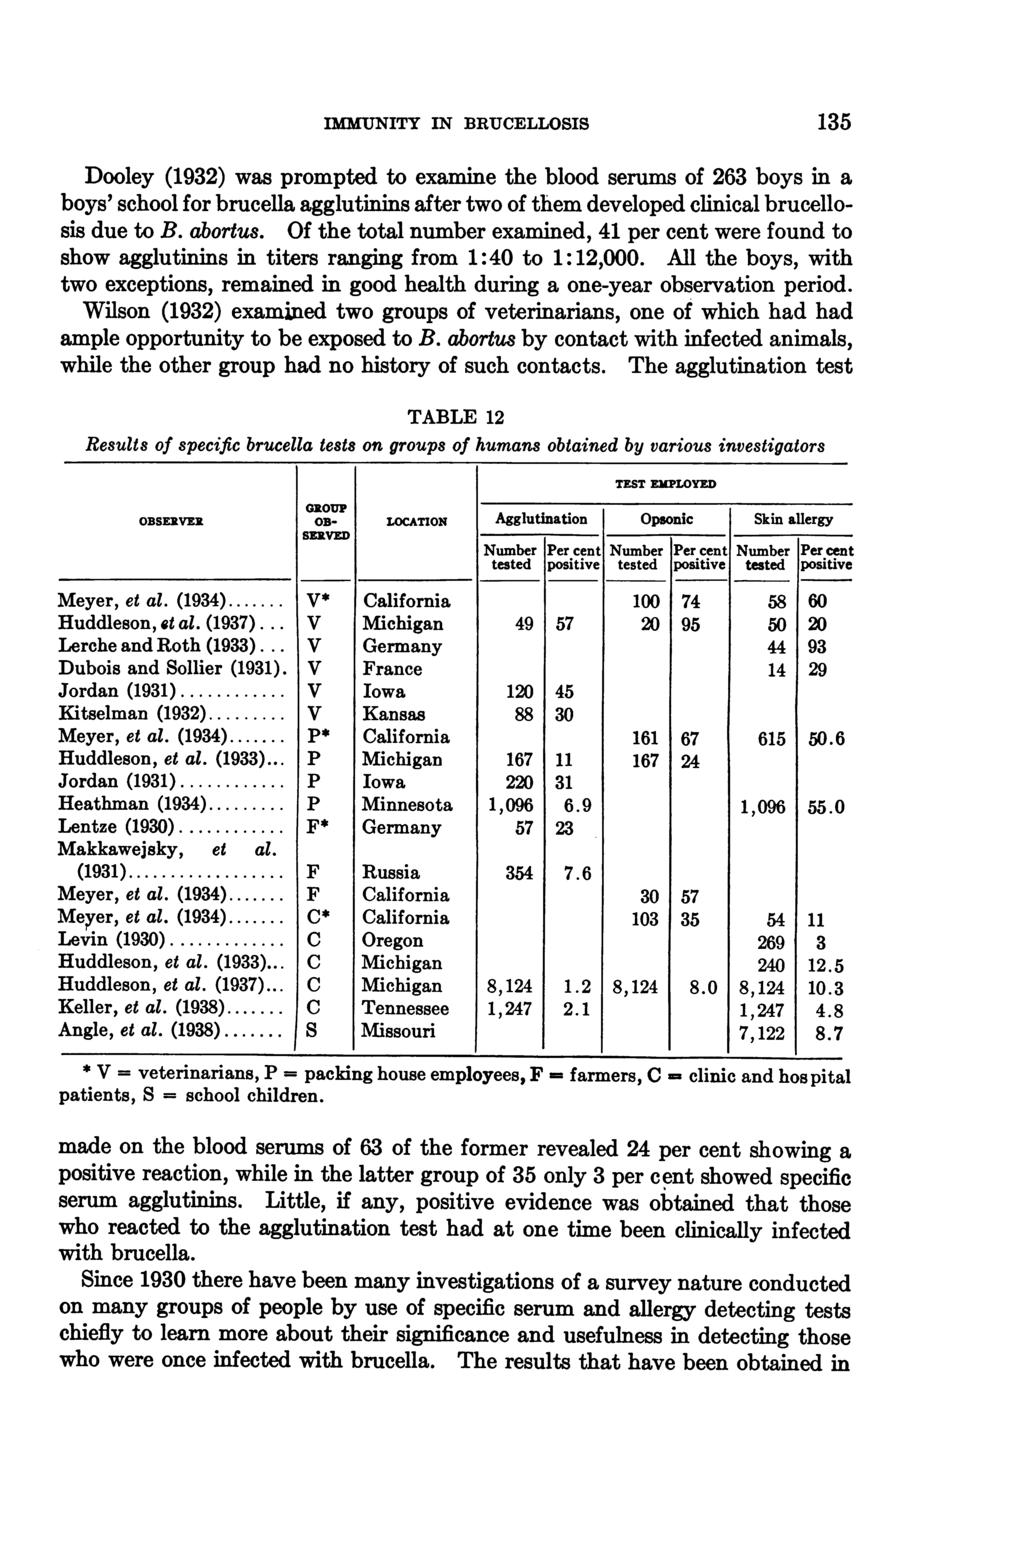 IMMUNITY IN BRUCELLOSIS 135 Dooley (1932) was prompted to examine the blood serums of 263 boys in a boys' school for brucella agglutinins after two of them developed clinical brucellosis due to B.